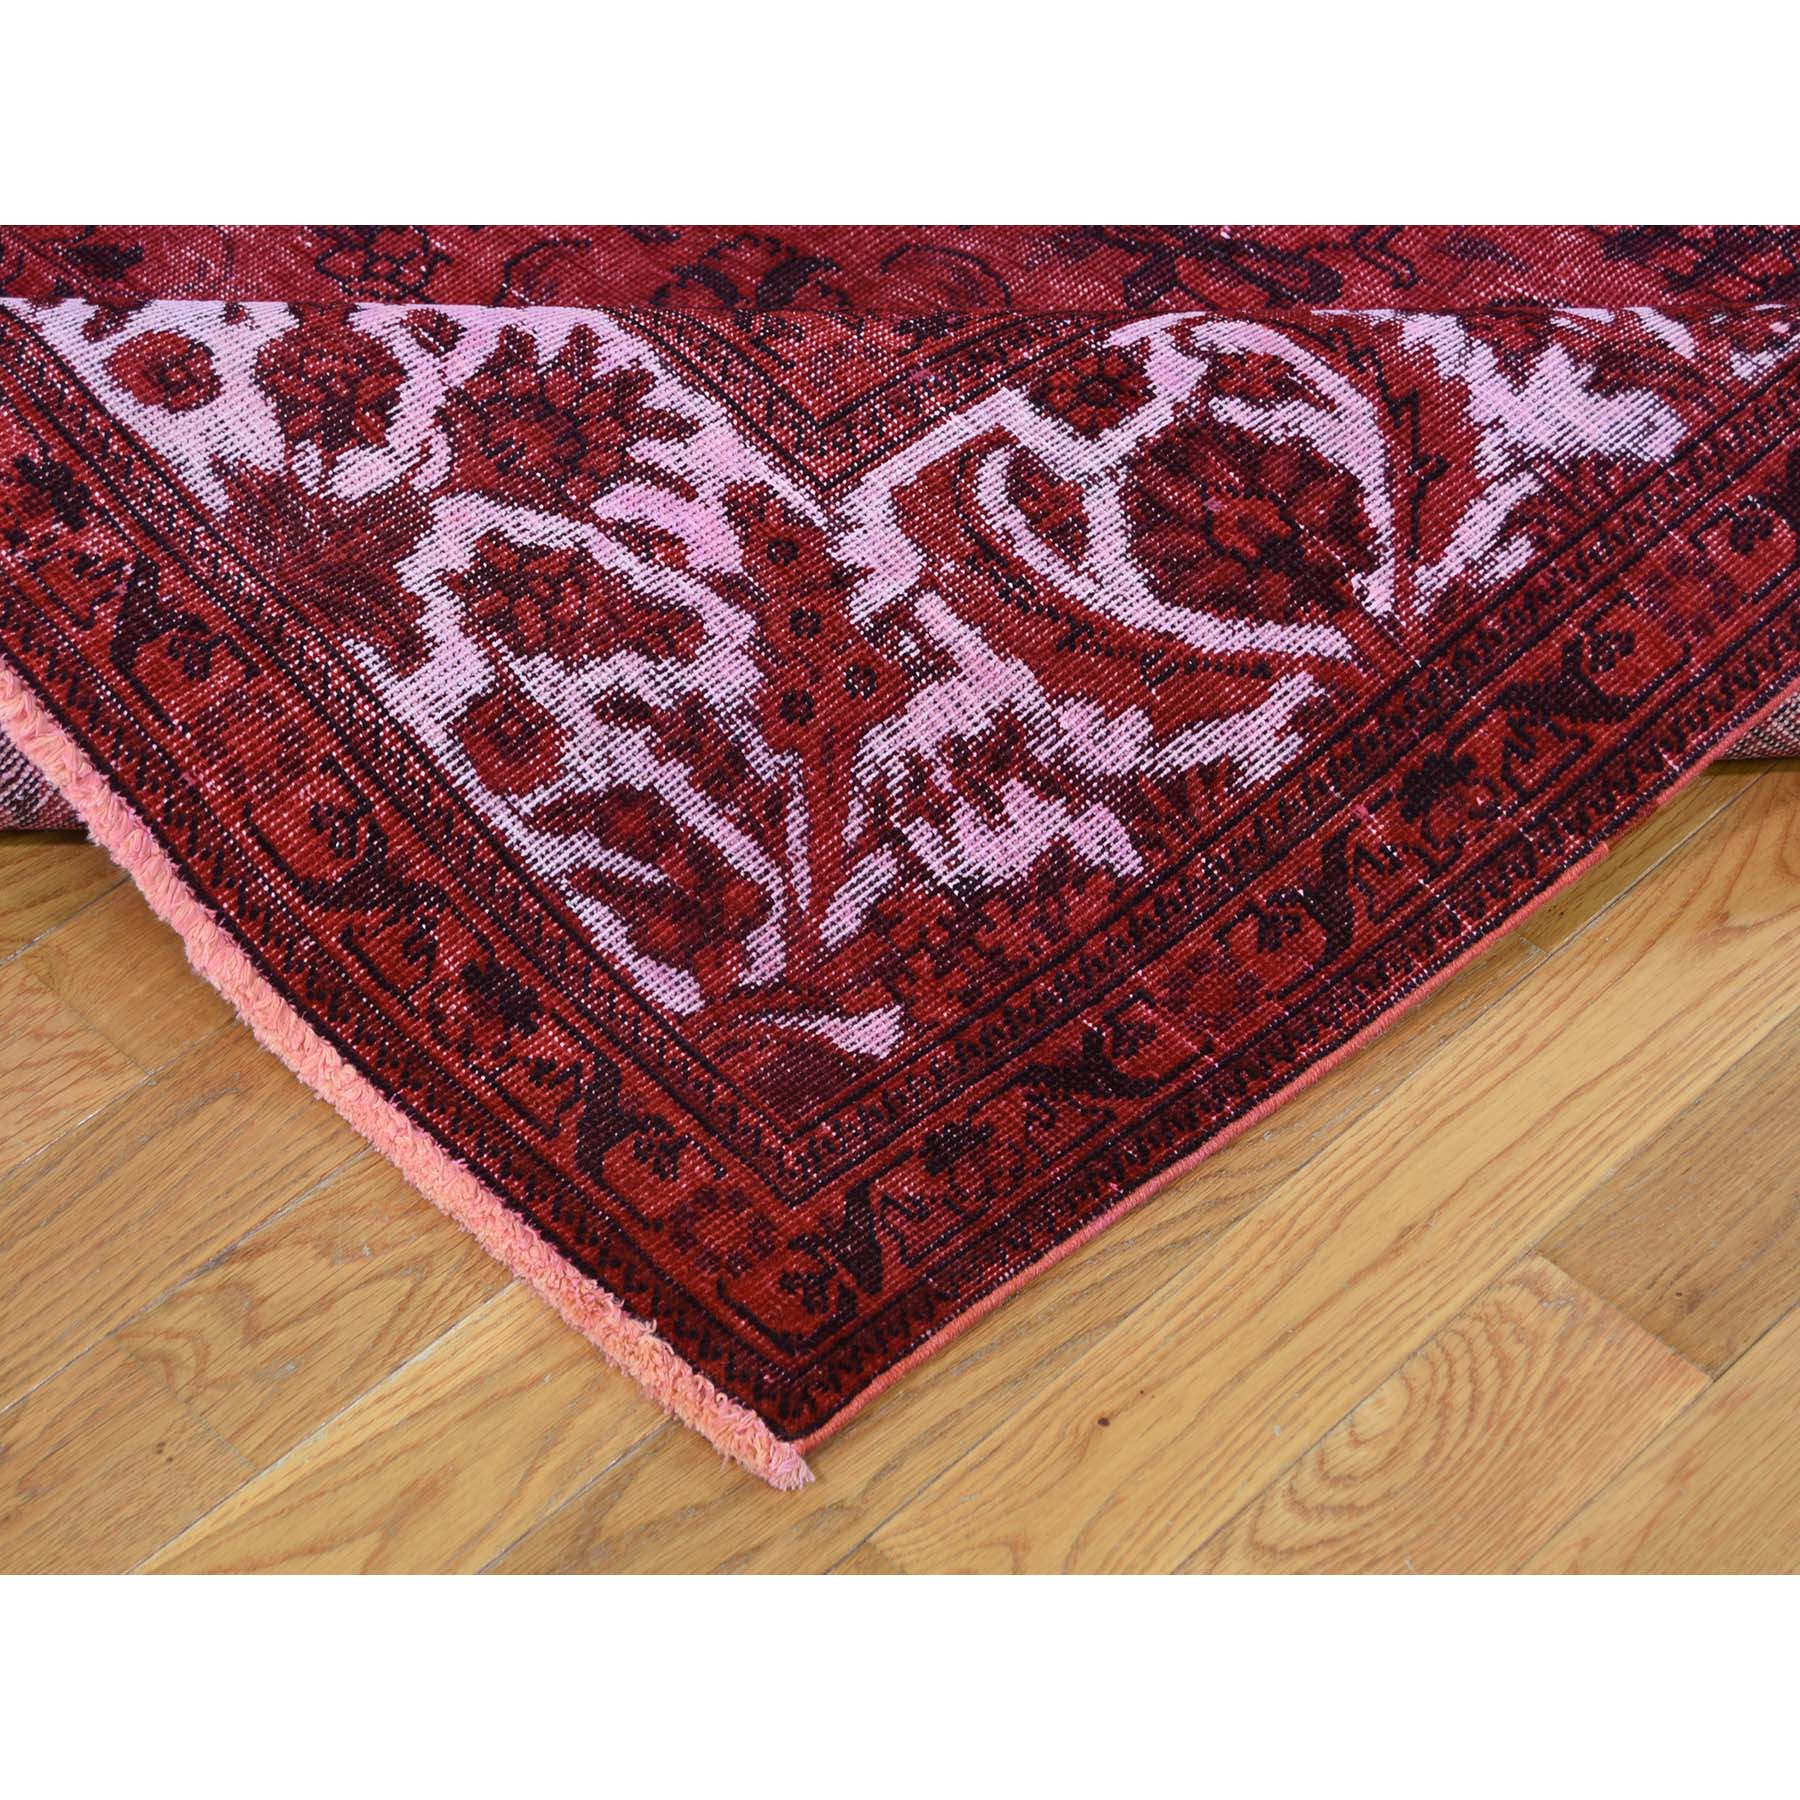 8-7 x10-8  Red Overdyed Pure Wool Persian Tabriz Hi-low Hand-Knotted Oriental Rug 